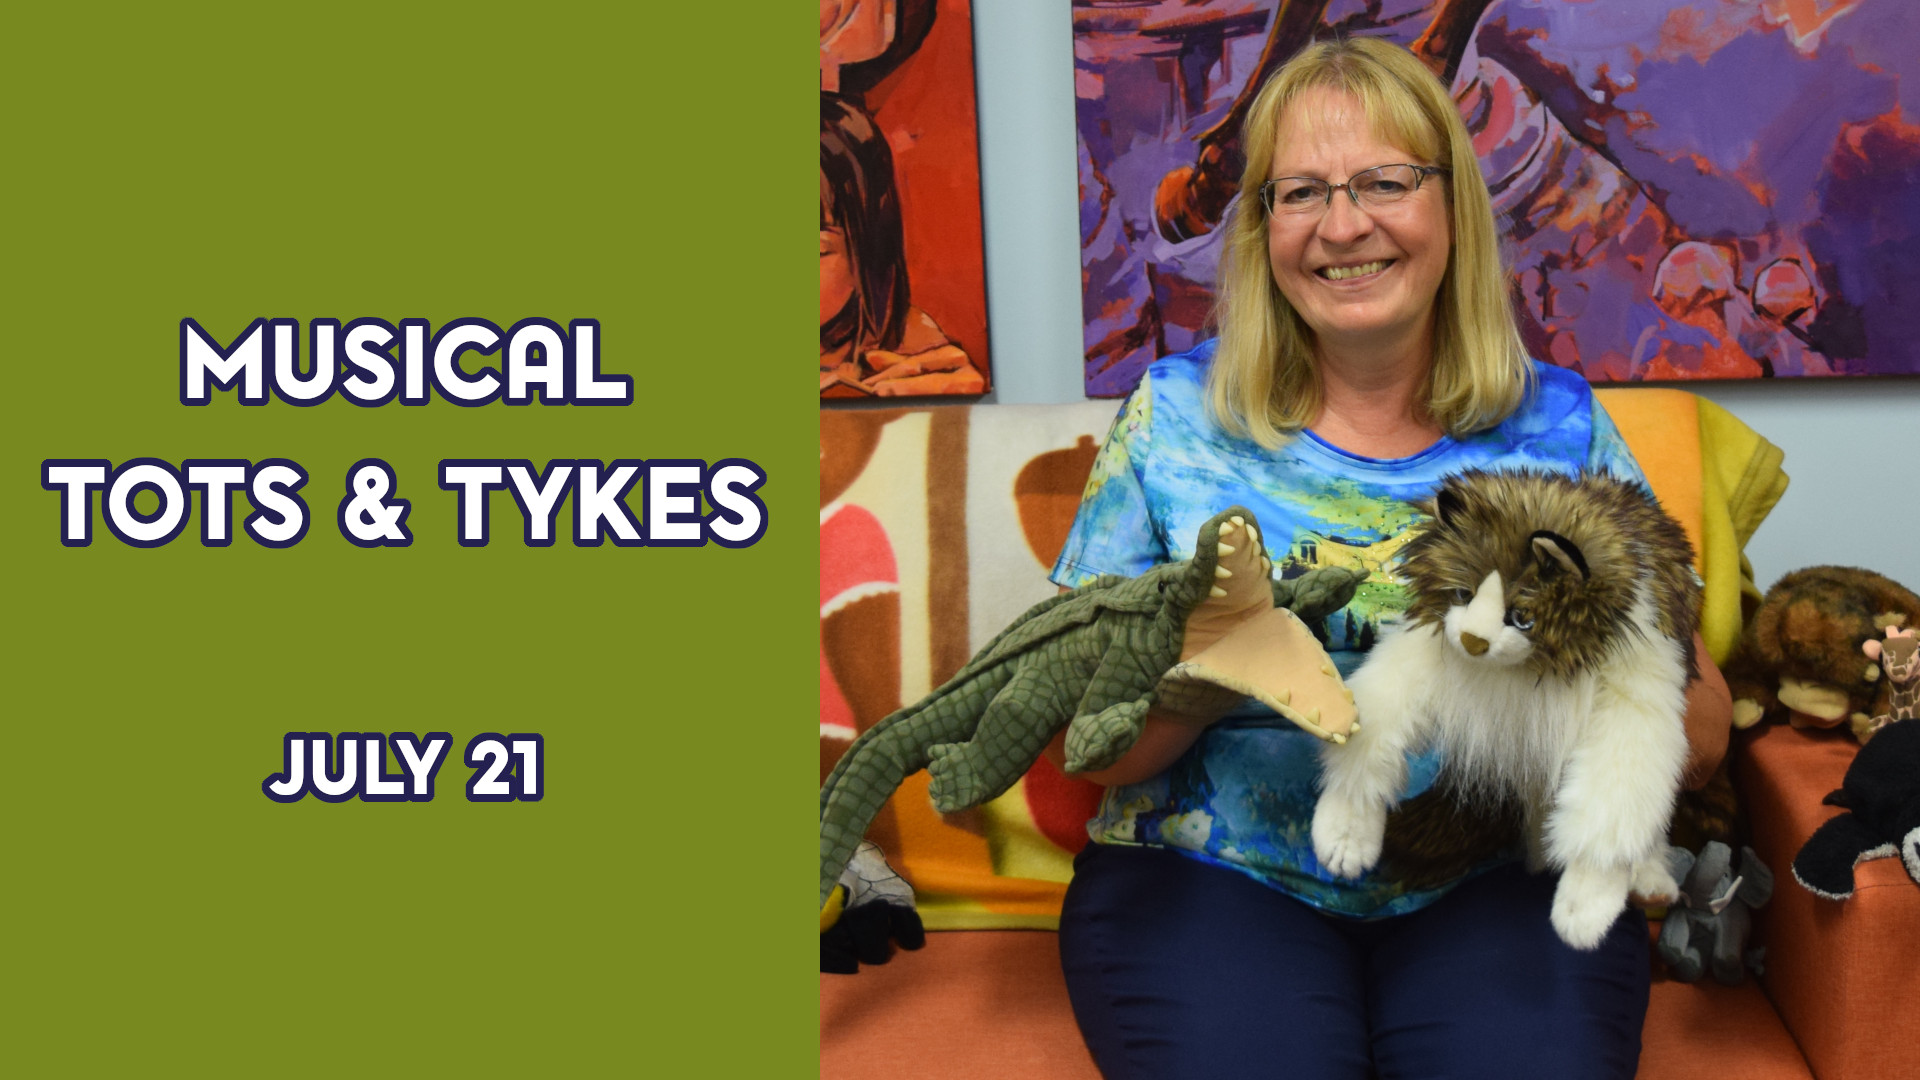 A woman holds puppets next to the text "Musical Tots & Tykes July 21"